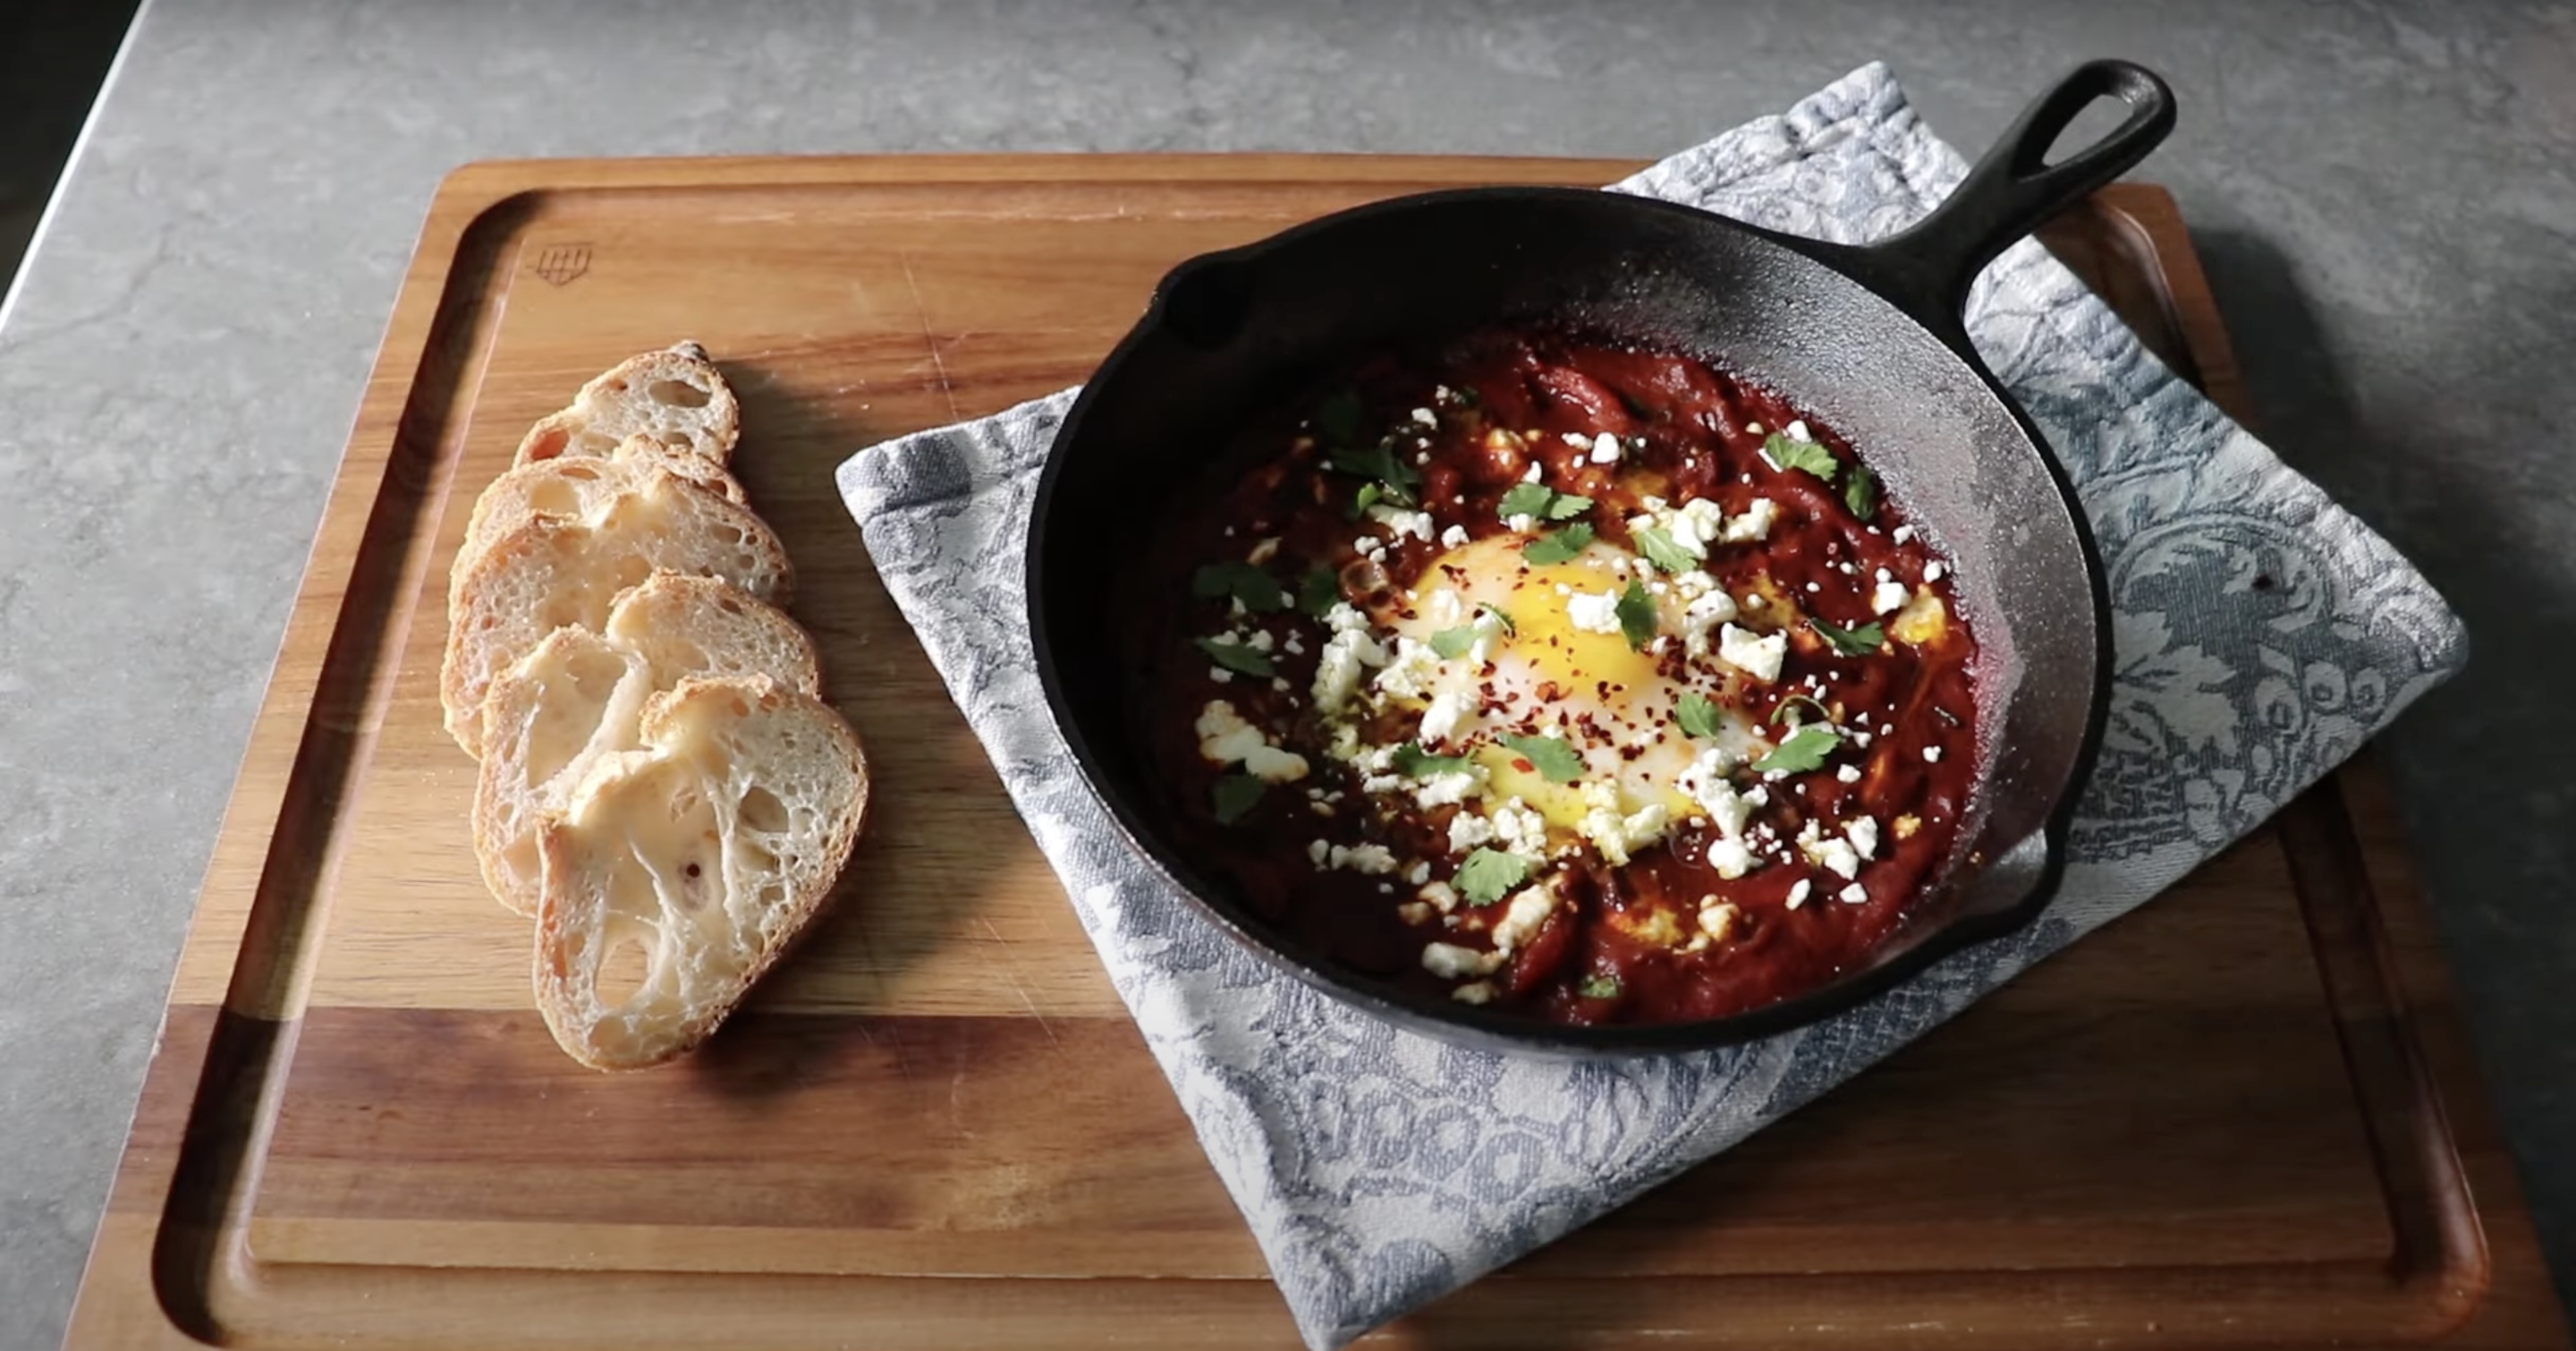 Shakshuka, made by Chef John on the Food Wishes YouTube Channel. Image taken from the "Shakshuka for One" video.